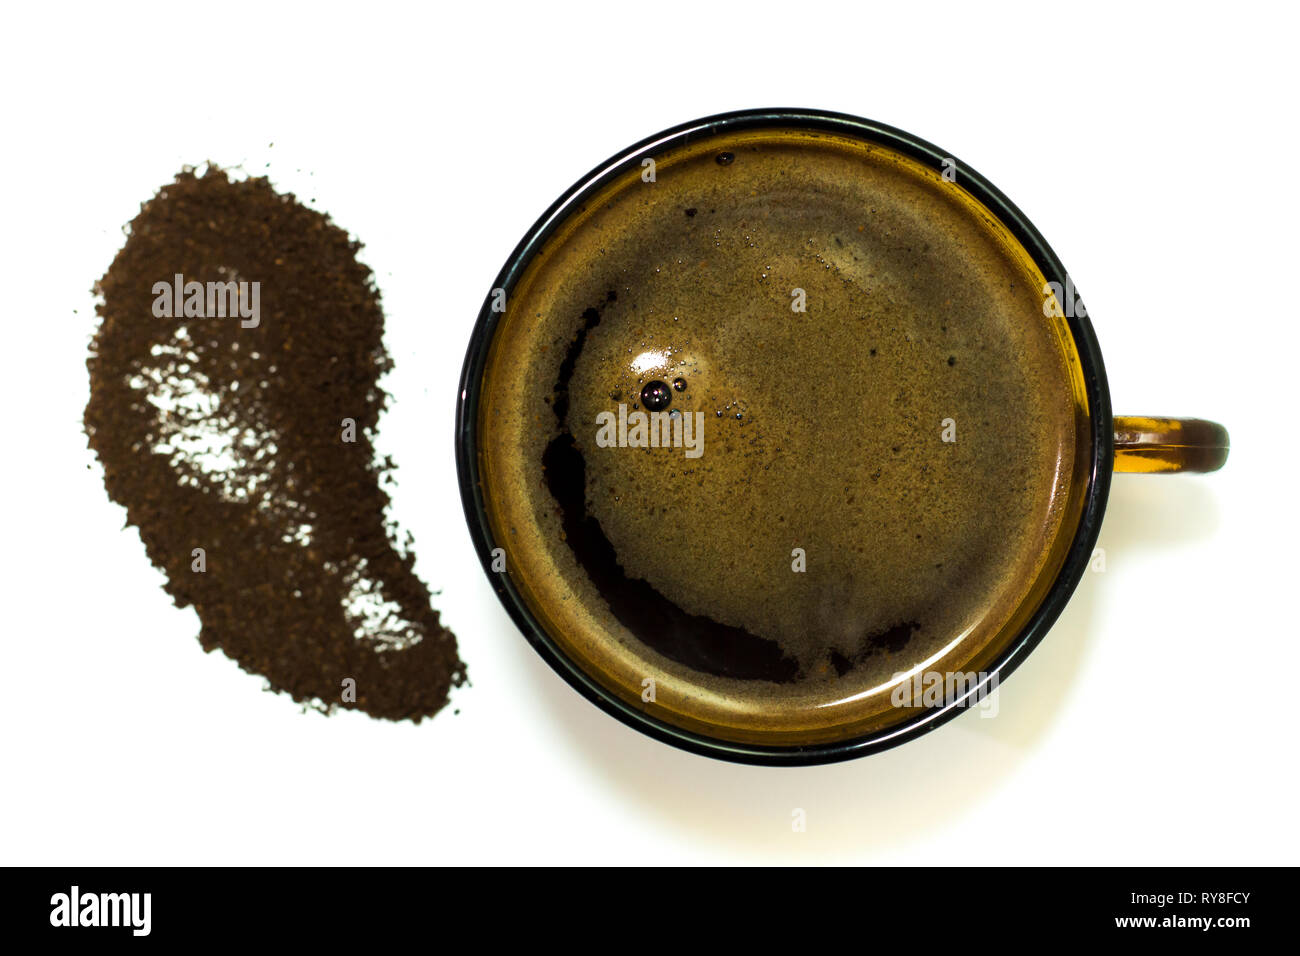 Espresso coffee in a glass dish and coffee powder on the side, isolate on a white background. It looks delicious Stock Photo